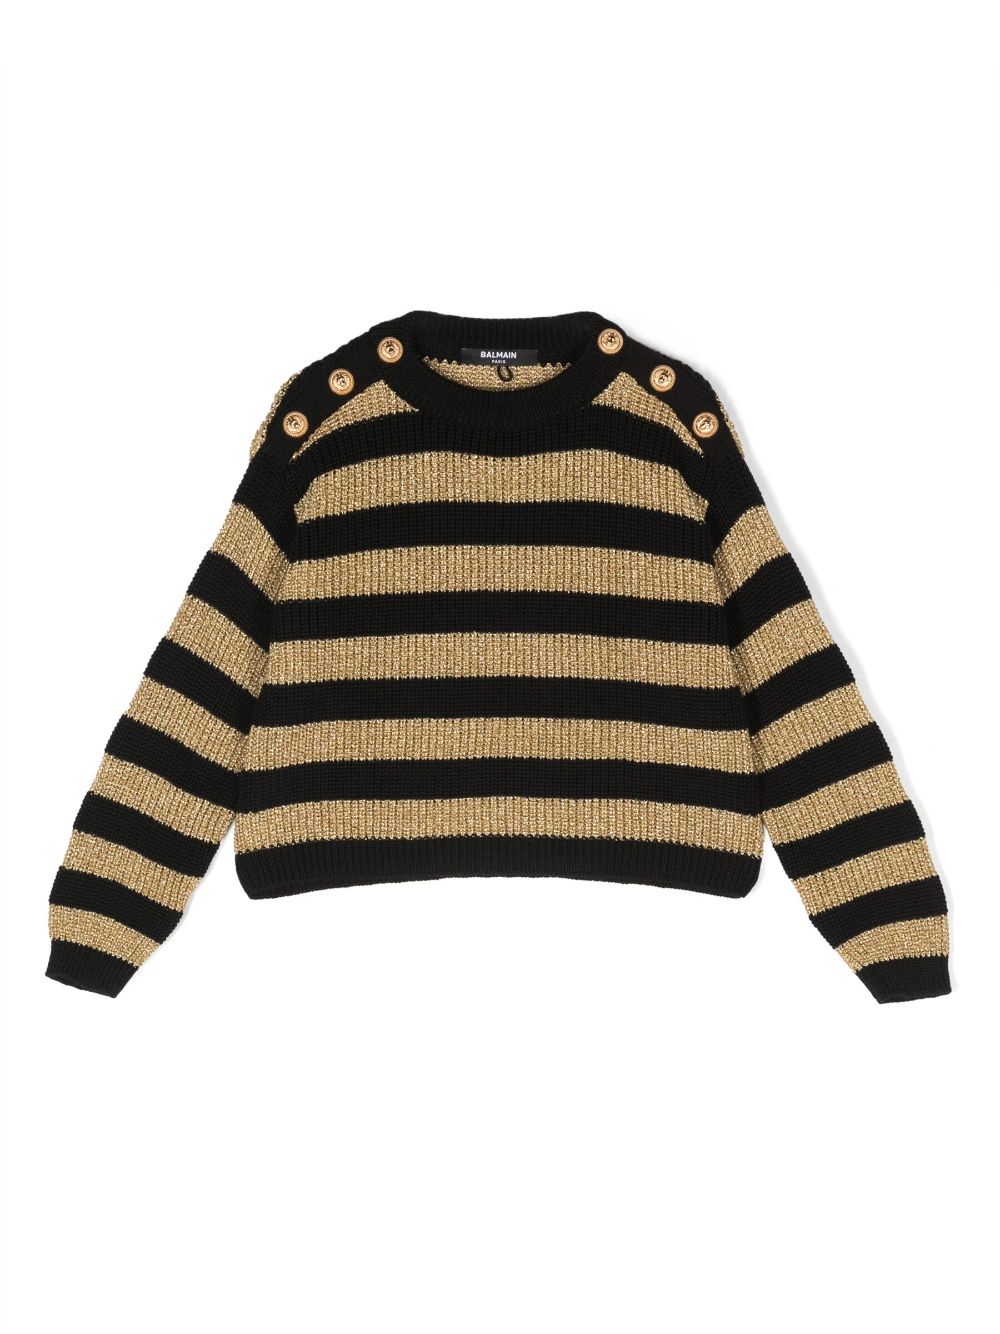 Black and gold sweater for girls